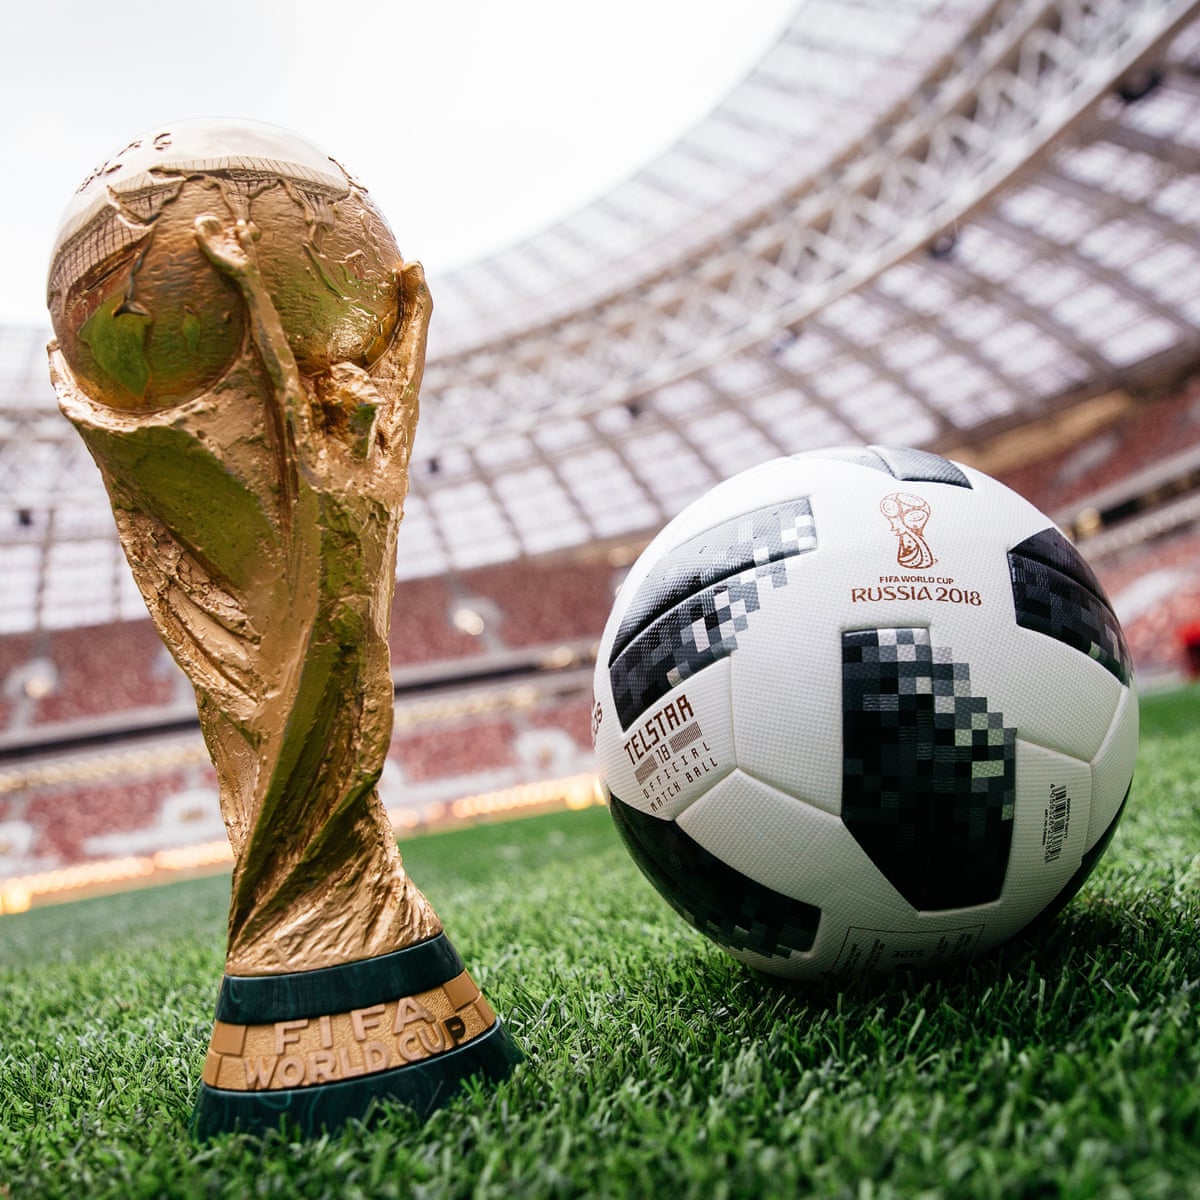 Fifa's biennial World Cup plan draws negative reaction from